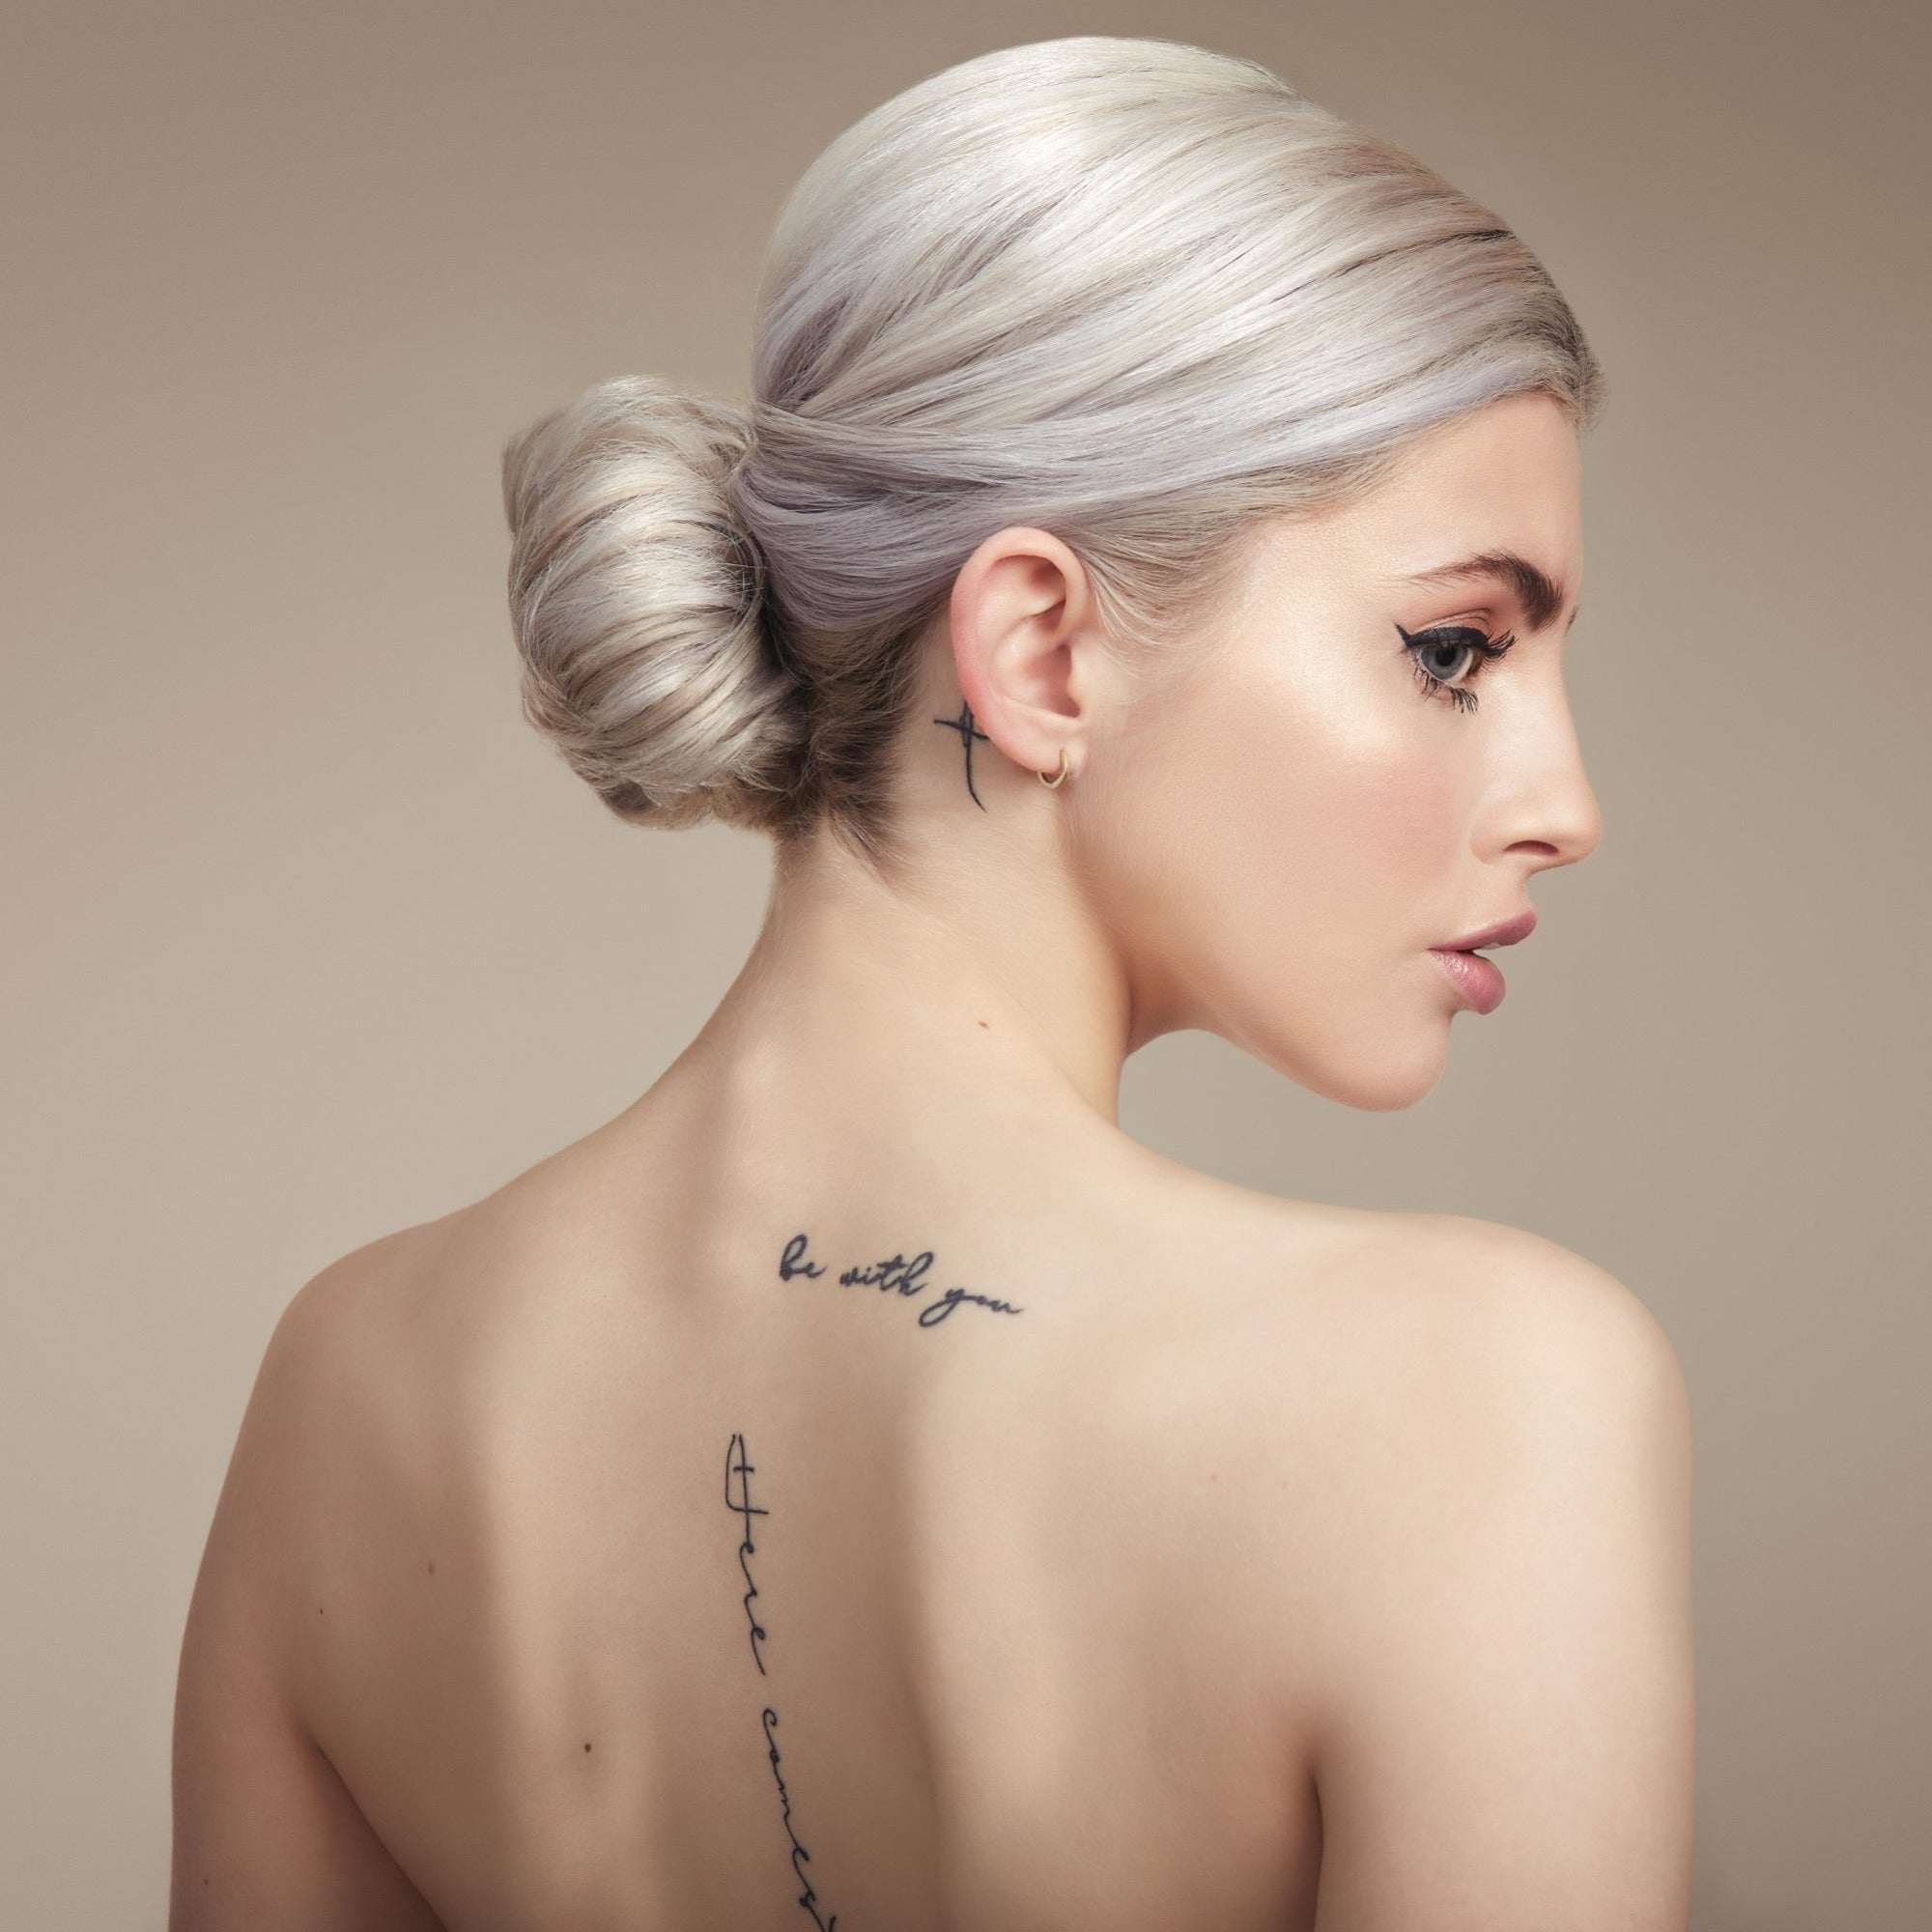 Female model with bleached blond hair in a bun. She has her back to the camera so you can see the bun and she is turning her head to the side so you can see her profile. Her back is bare and she has some tattoos.